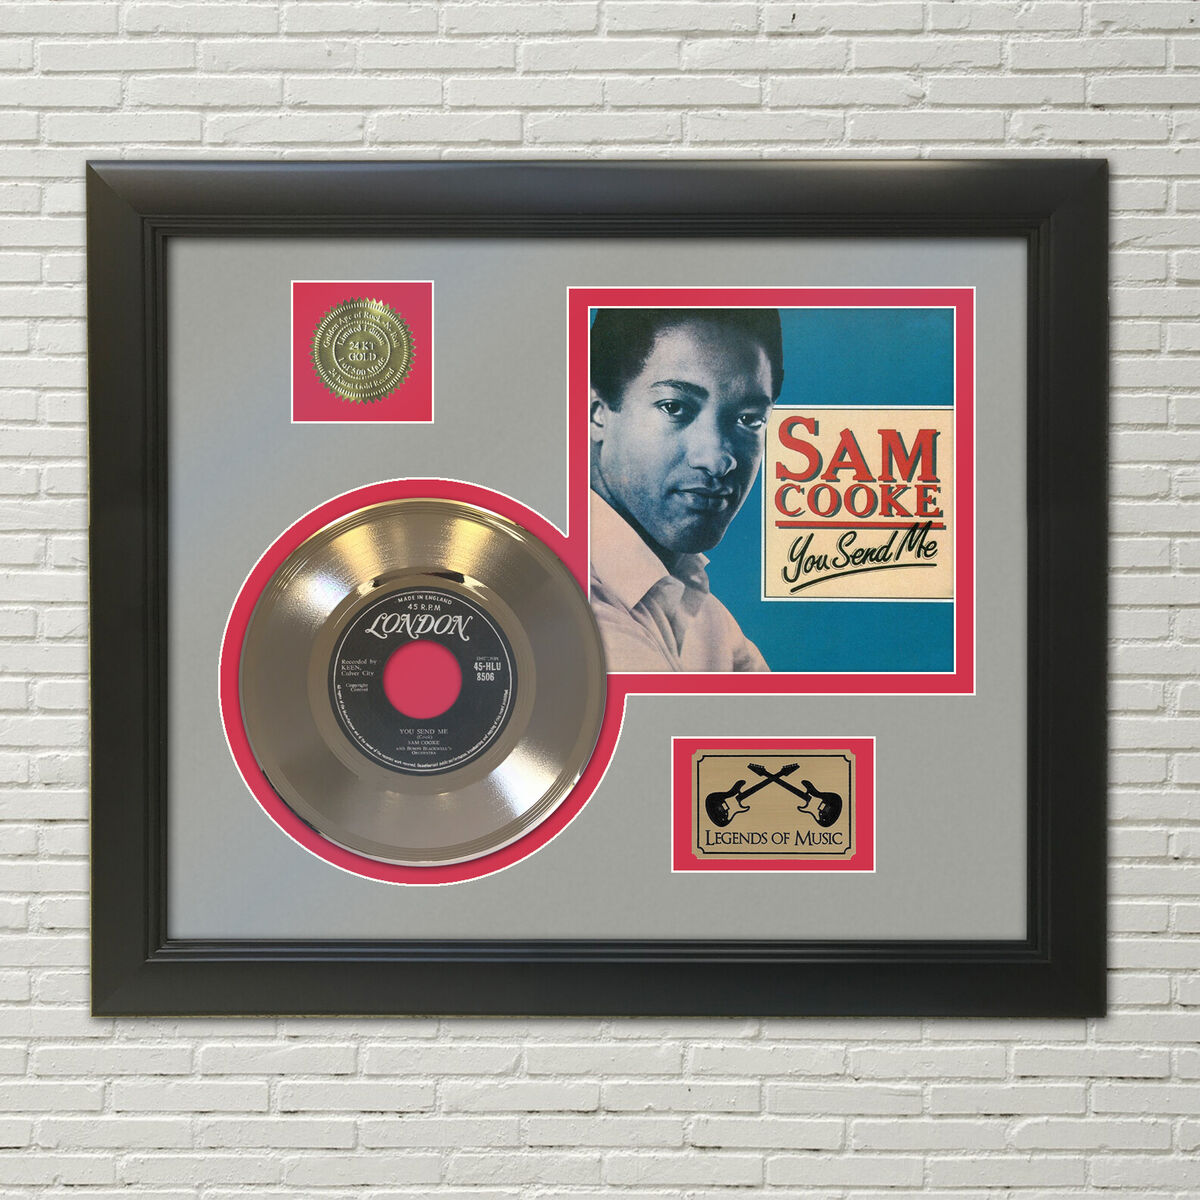 Sam Cooke You Send Me Framed Picture Sleeve Gold 45 Record Display Gold  Record Outlet Album and Disc Collectible Memorabilia